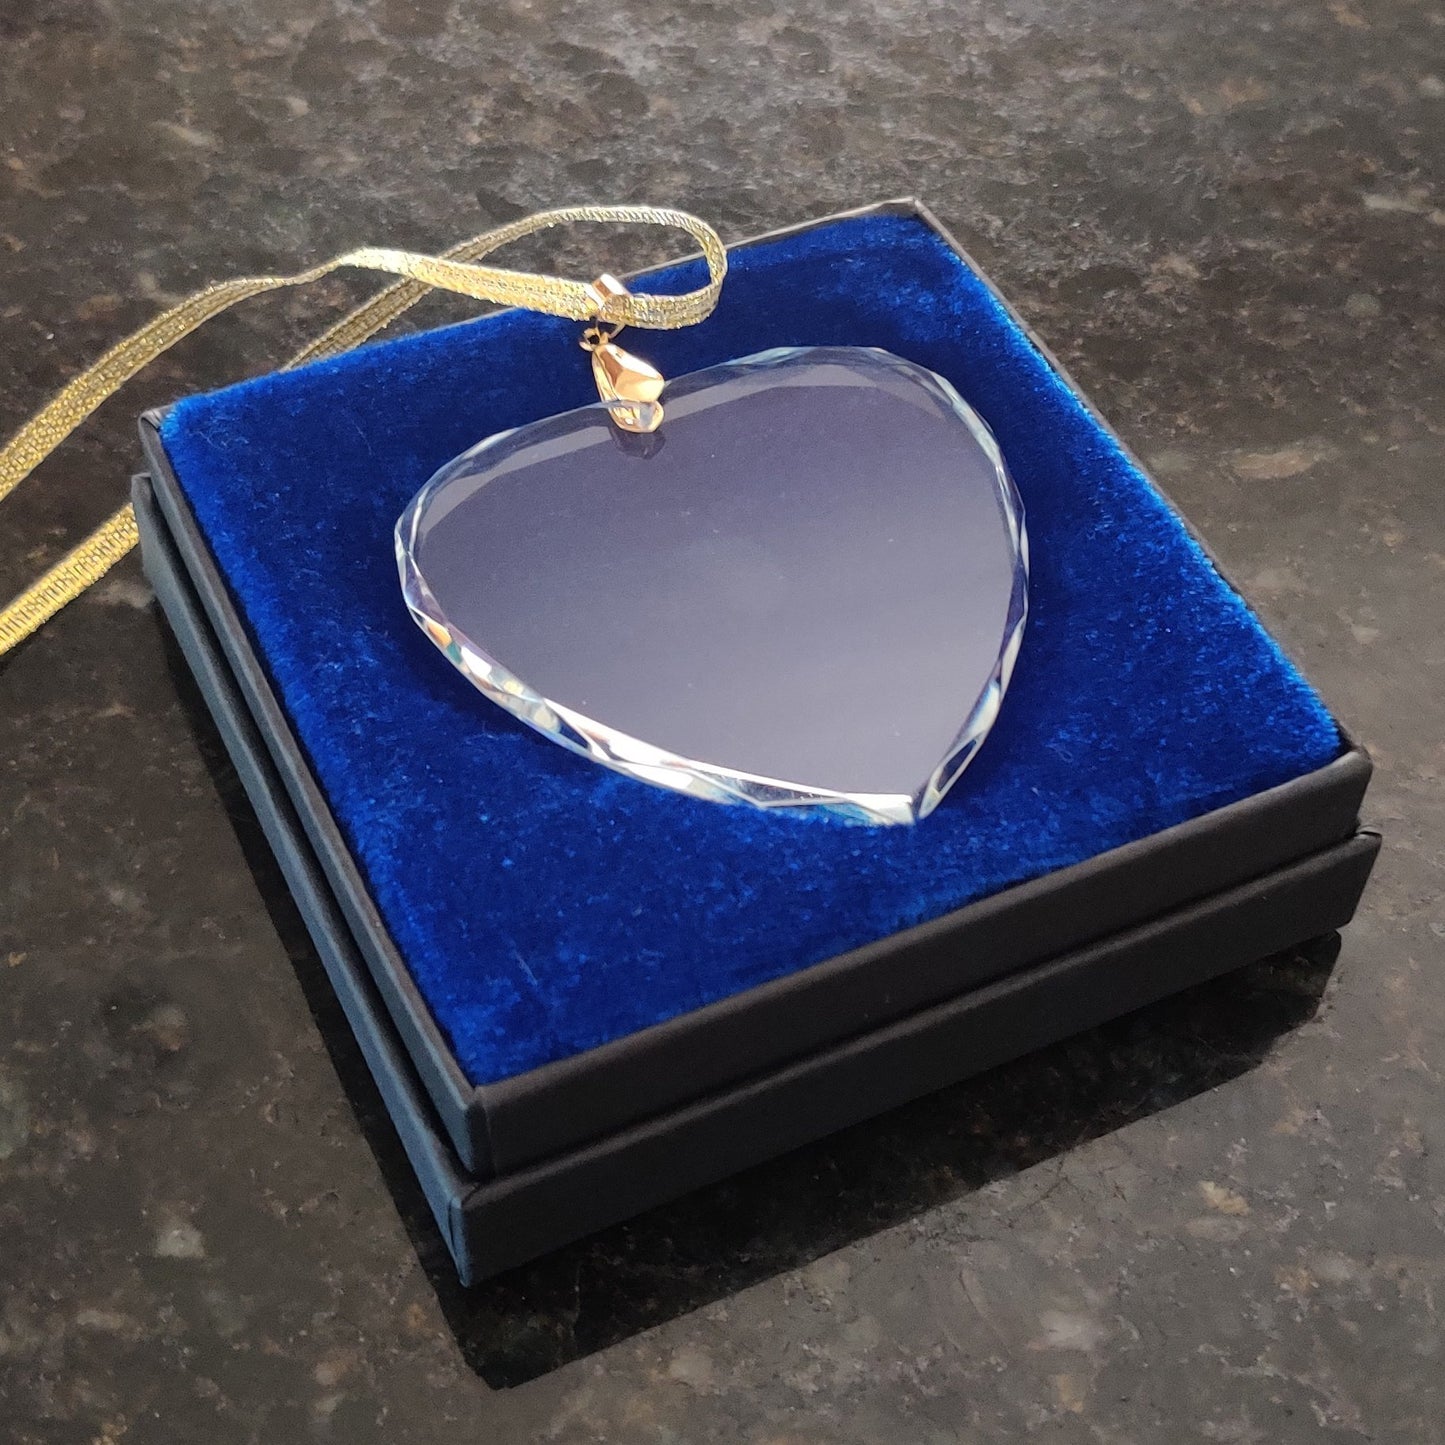 LaserGram Christmas Ornament, Engineering, Personalized Engraving Included (Heart Shape)